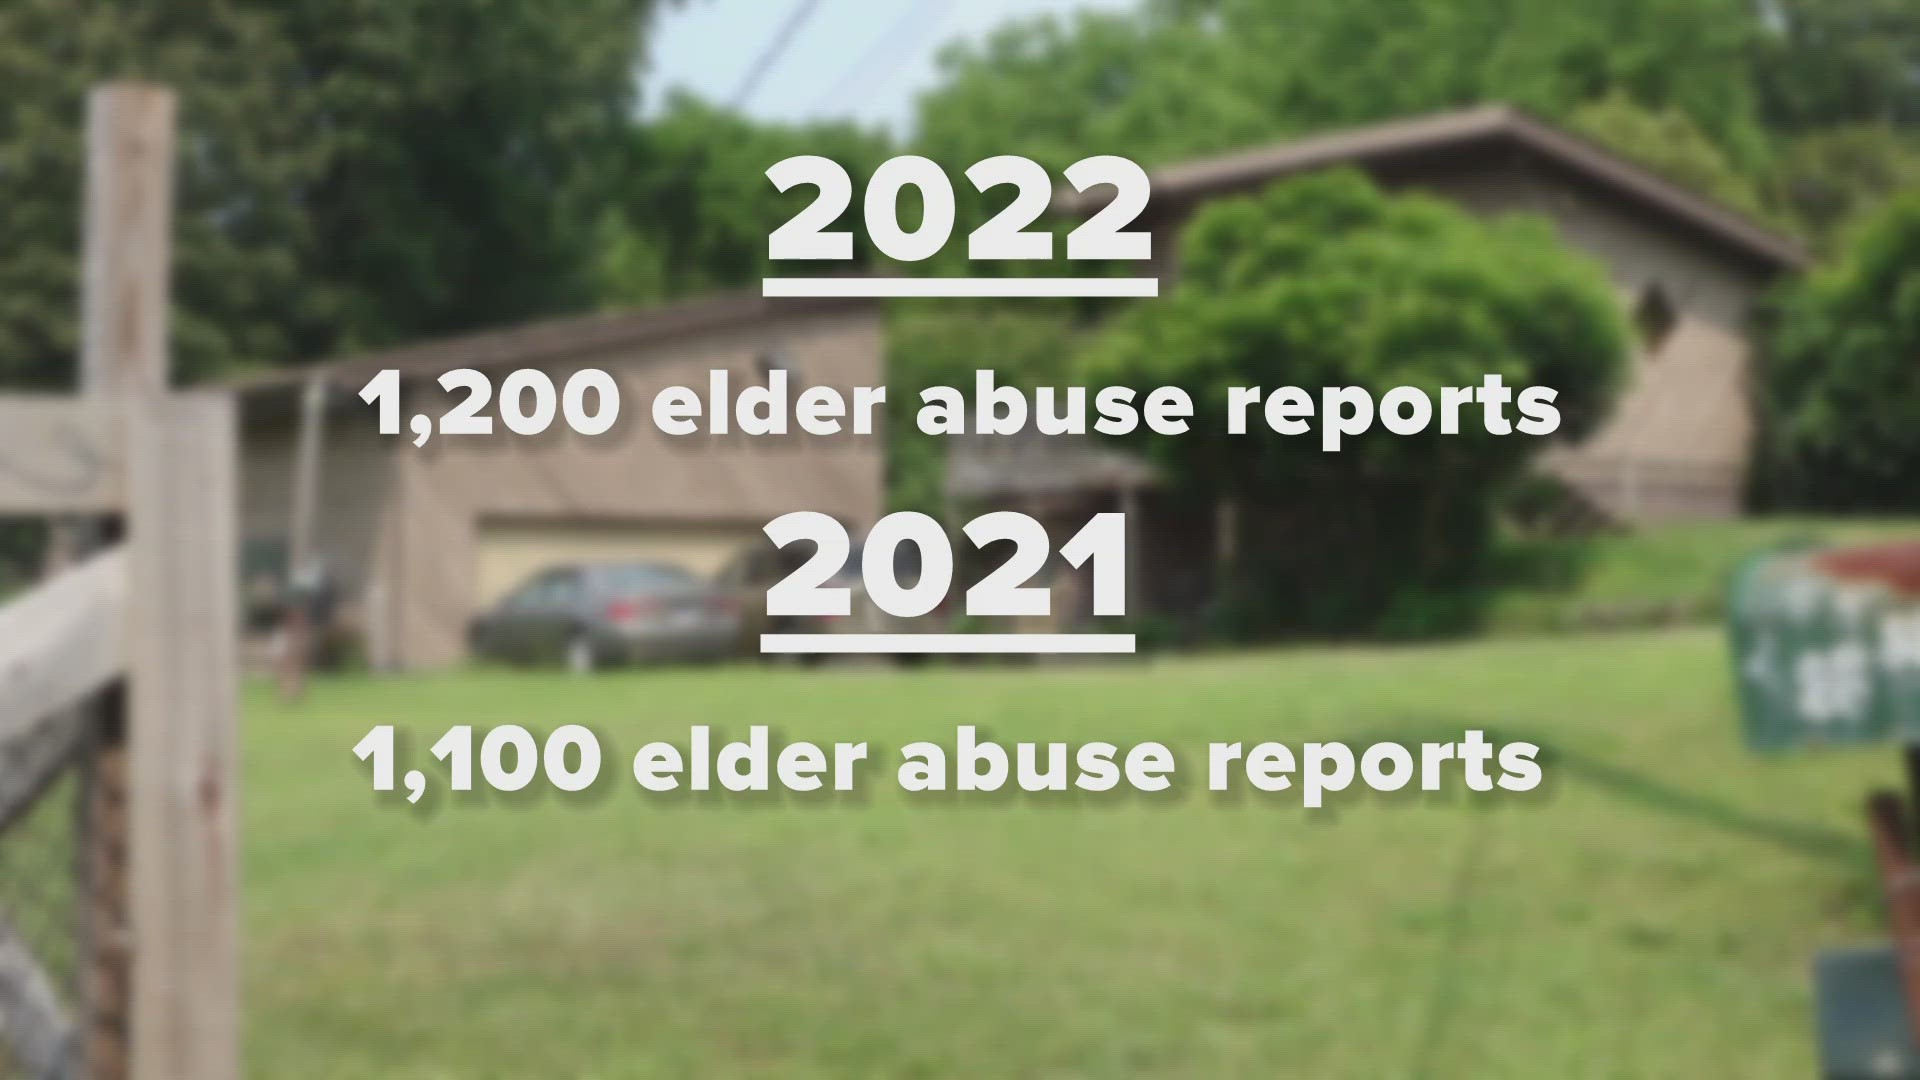 The District Attorney General's Vulnerable Adult Protective Investigation Team examined 1,200 reports of elder abuse and neglect in 2022.